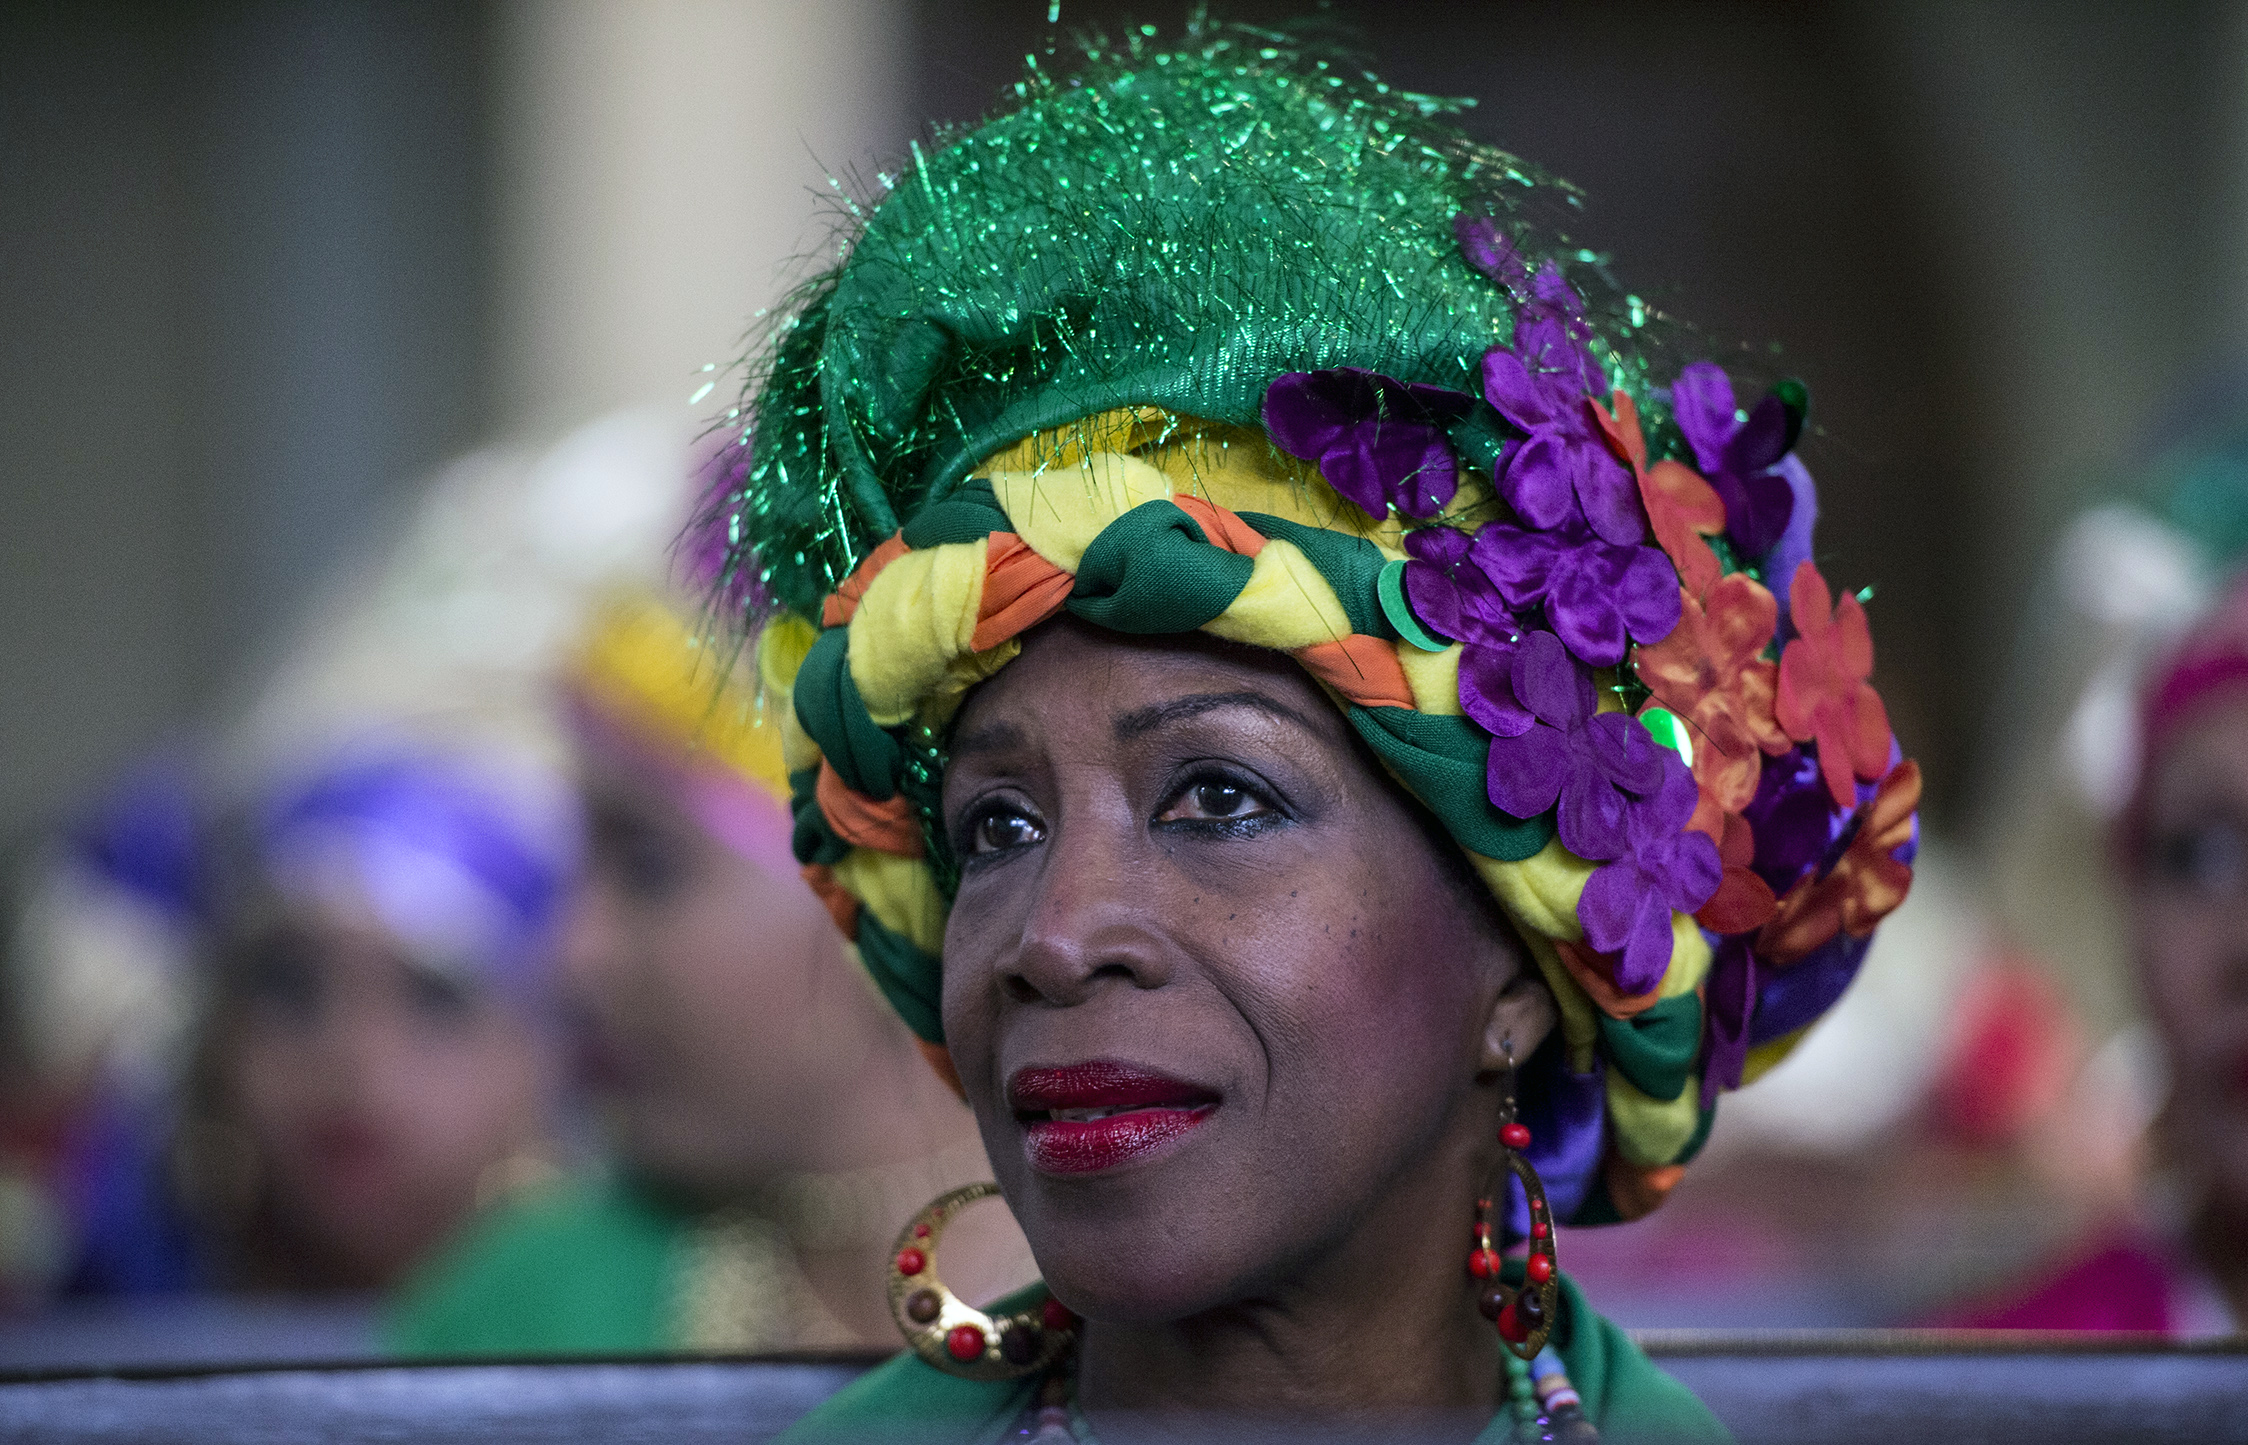 A woman dressed as "madama" attend a mass before the beginning of the Carnival in El Callao, Bolivar state, Venezuela on February 26, 2017.  El Callao's carnival was recently named Unesco's Intangible Cultural Heritage of Humanity and is led by the madamas, the pillars of Callaoense identity representing Antillean matrons considered the communicators of values, who dance and wear colourful dresses. / AFP PHOTO / JUAN BARRETO